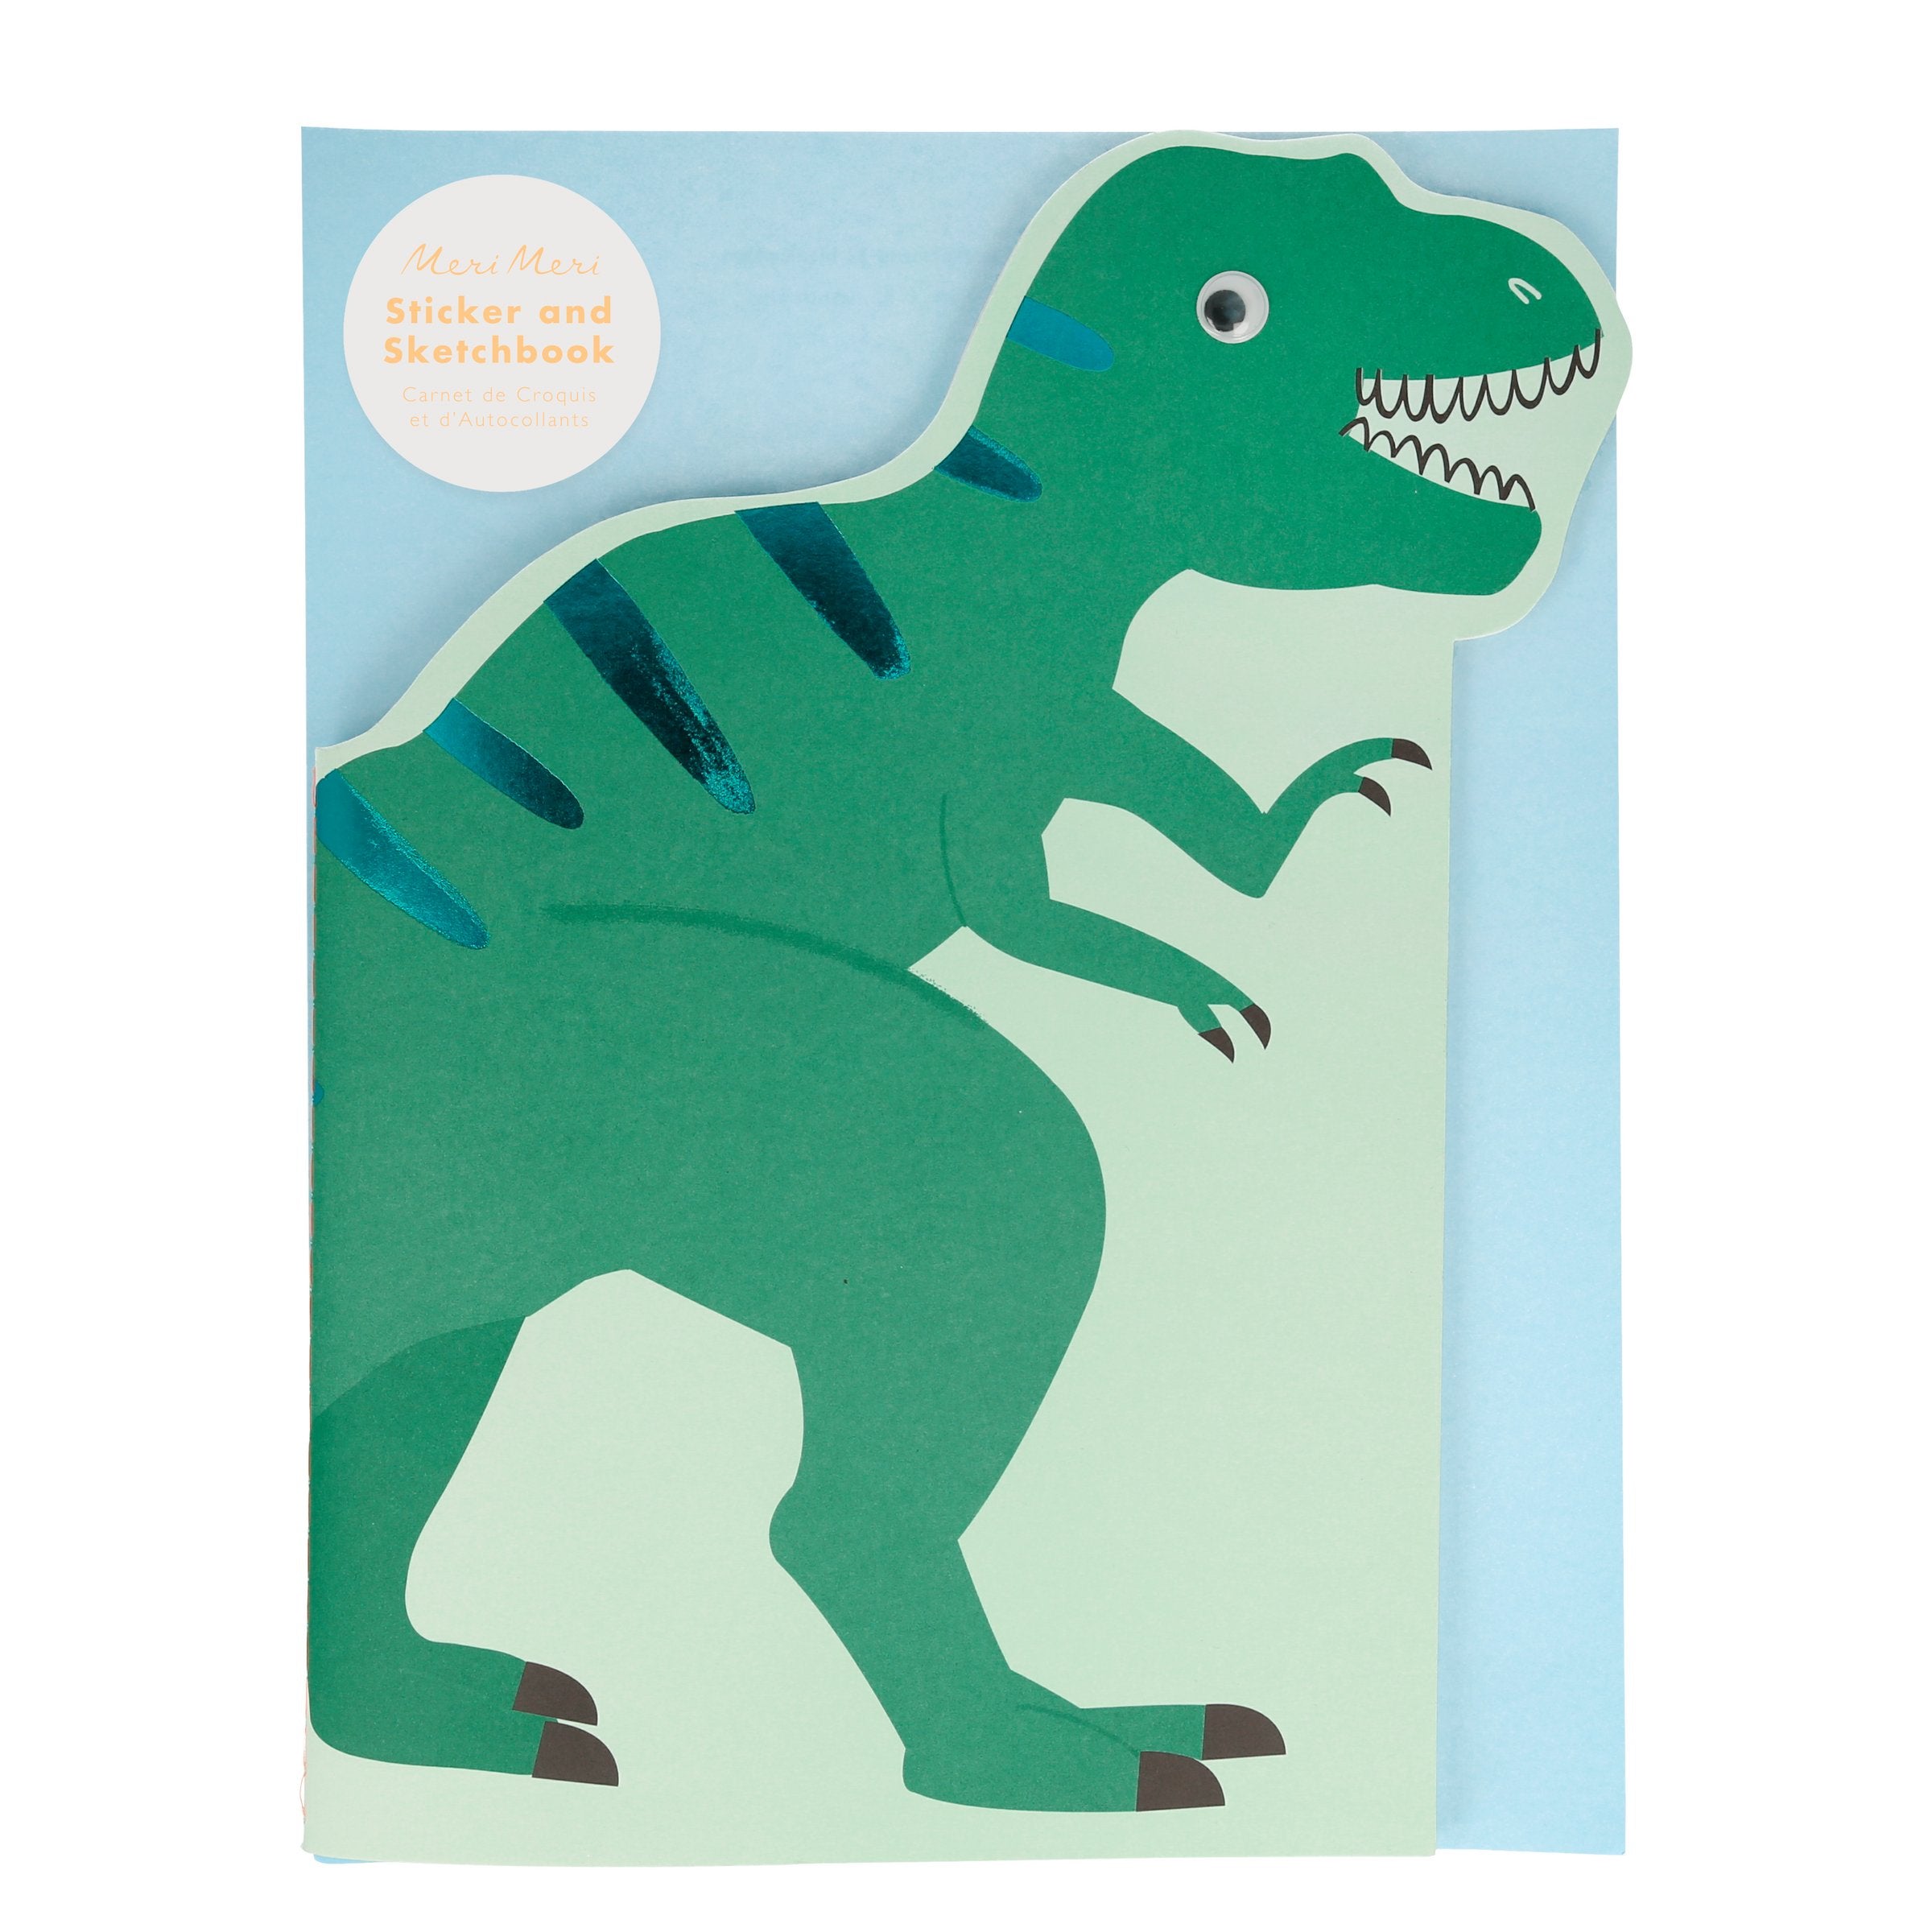 Creative kids who love dinosaurs will enjoy our sketch book filled with stickers, perfect to pop into dinosaur party bags.